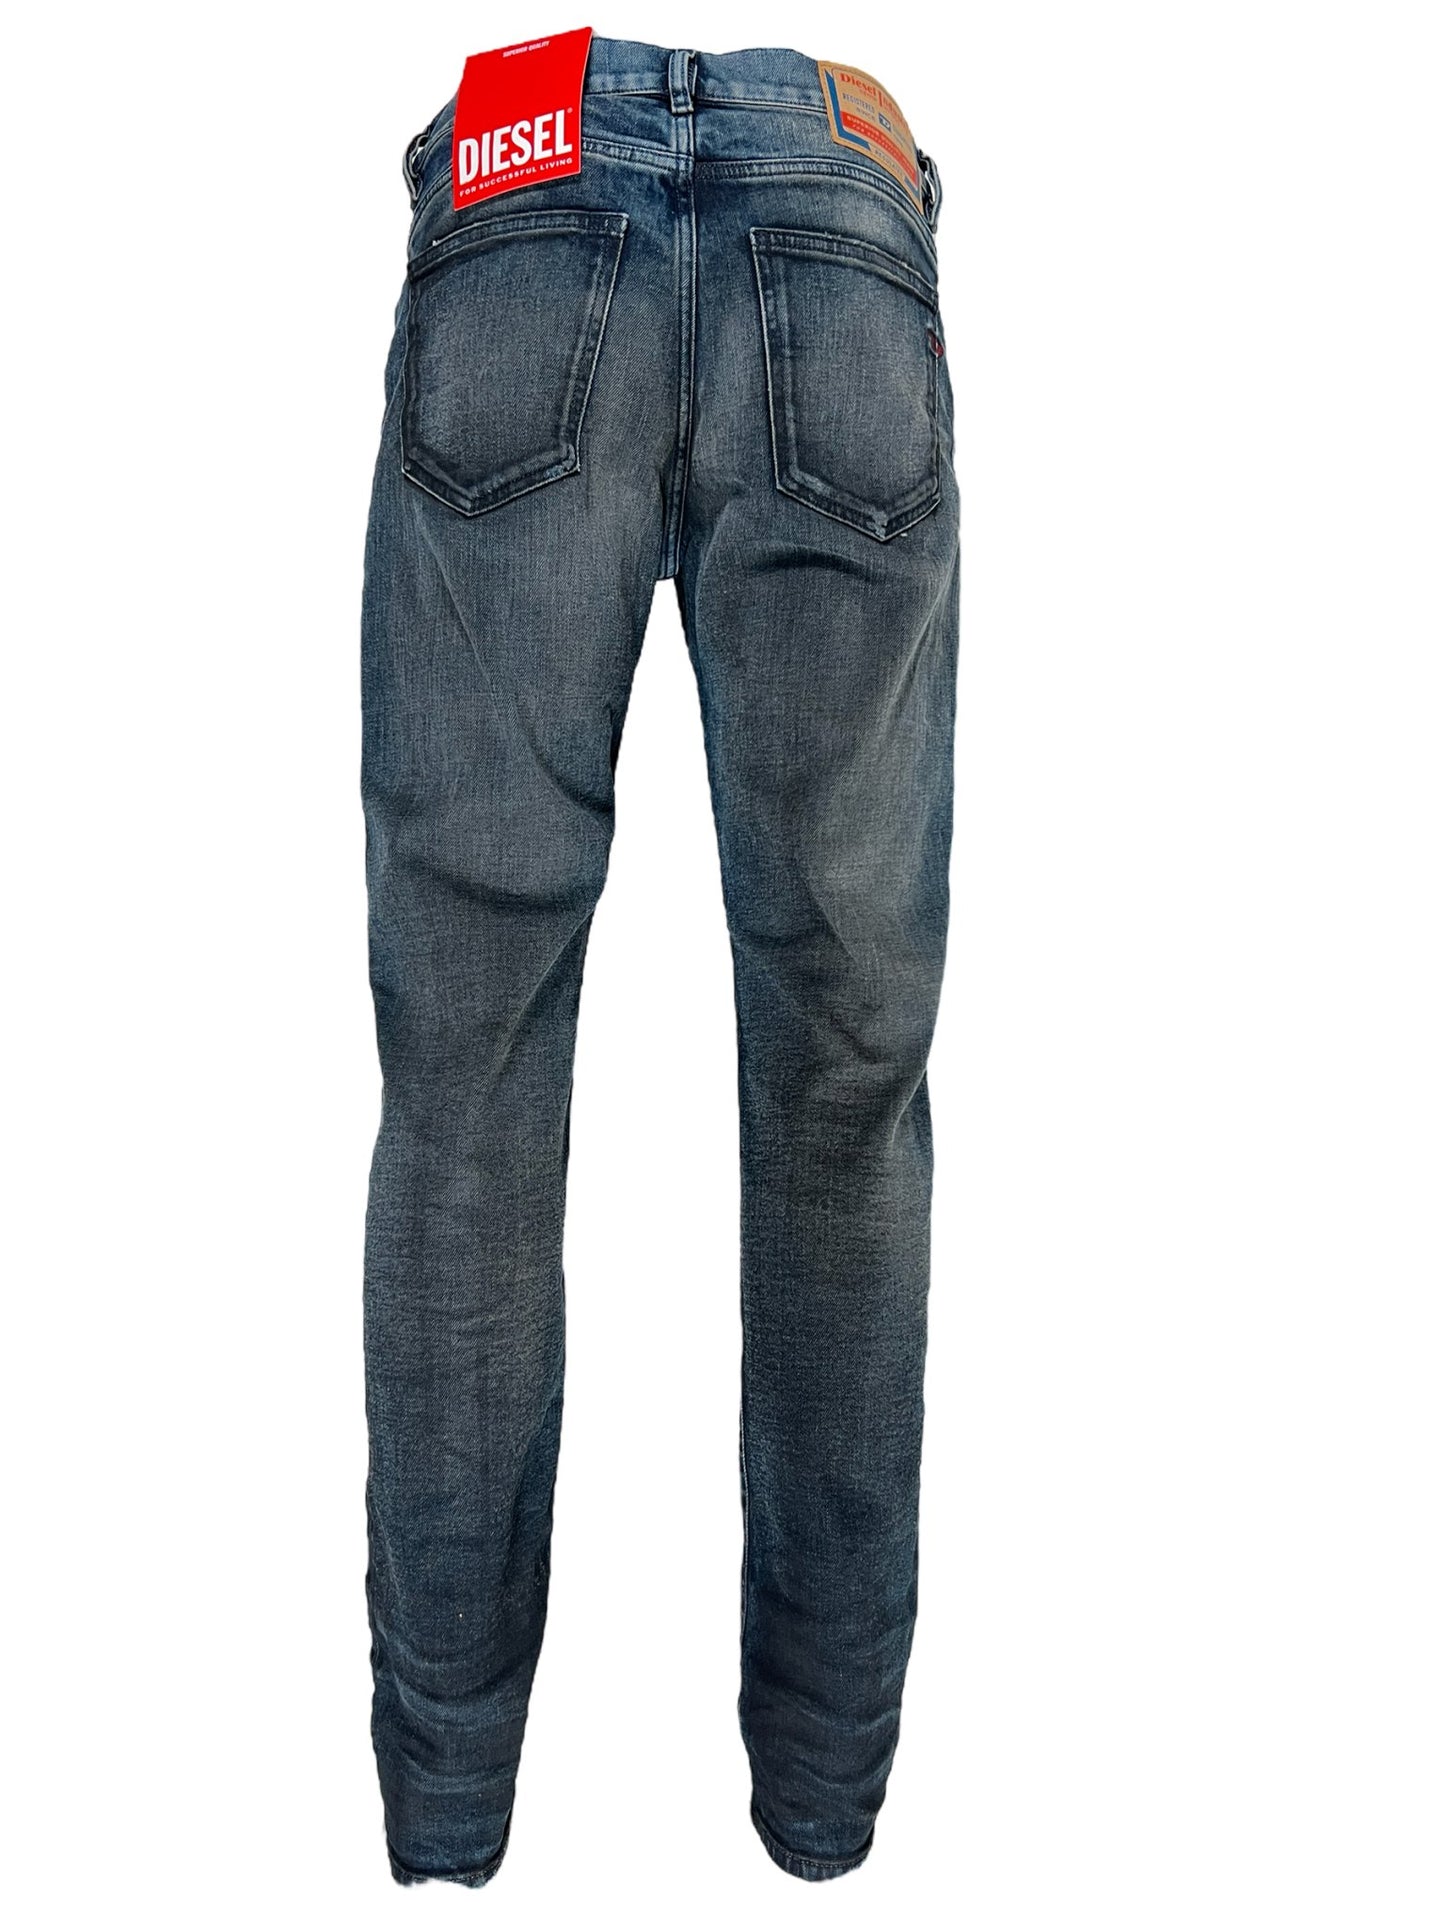 A pair of comfortable DIESEL jeans with a label on the back.